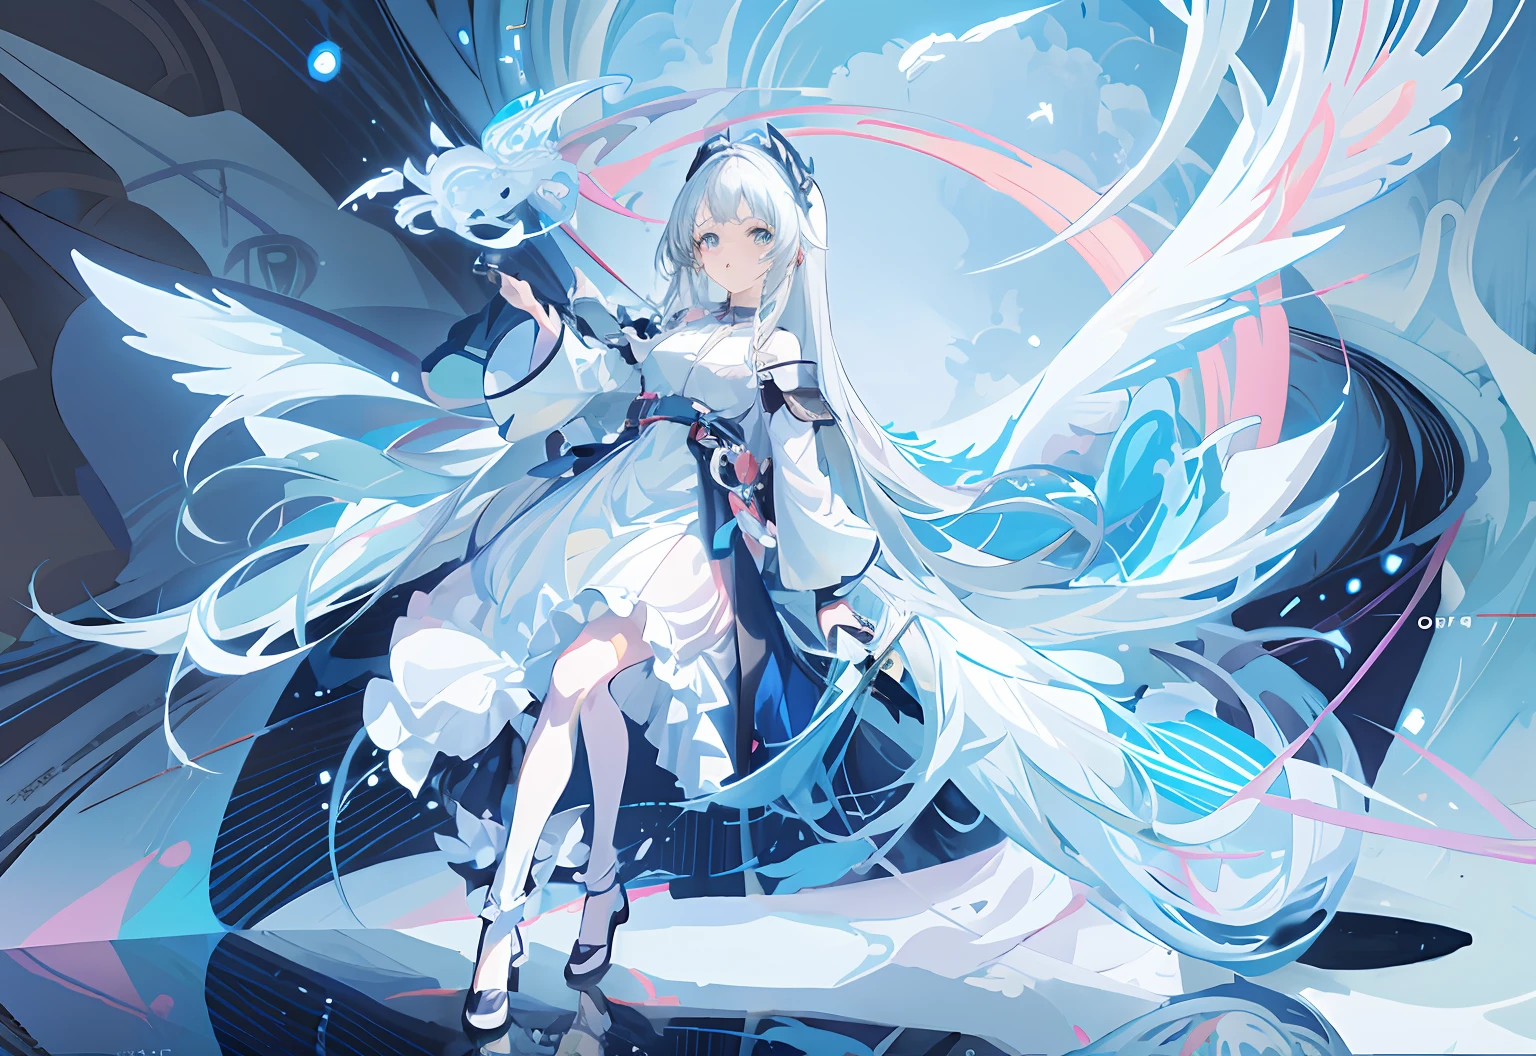 anime girl with long white hair and blue dress holding a wand, Anime art wallpaper 8 K, style of anime4 K, Anime art wallpaper 4k, Anime art wallpaper 4 K, Digital art on Pixiv, white-haired god, wallpaper anime blue water, Best anime 4k konachan wallpaper, beautiful fantasy anime, ultra hd anime wallpaper, ethereal anime